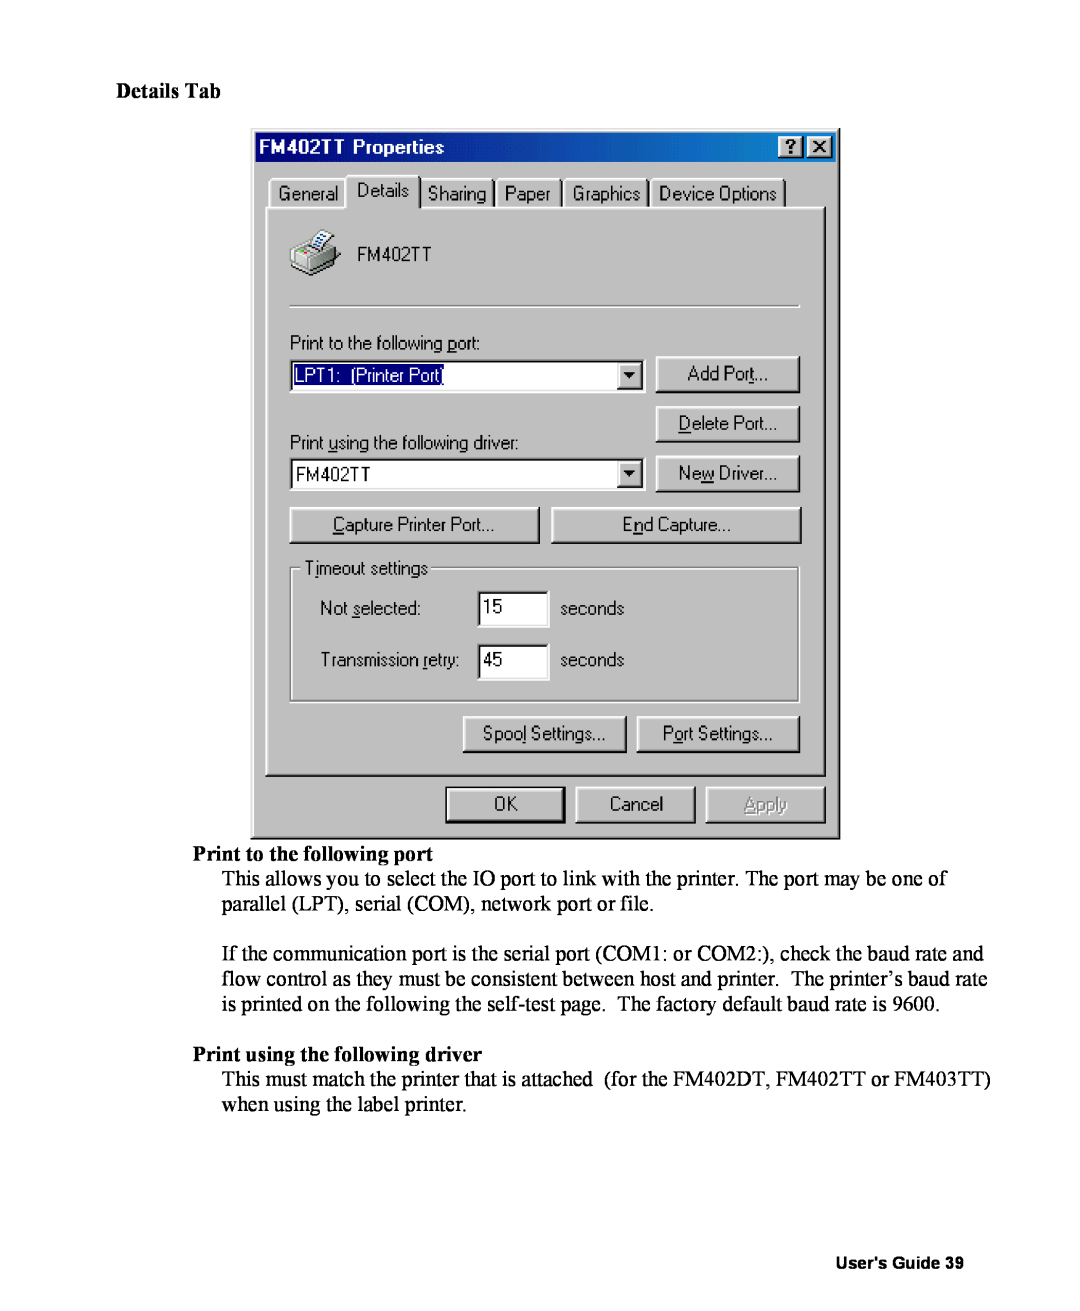 AMT Datasouth 400 manual Details Tab Print to the following port, Print using the following driver 